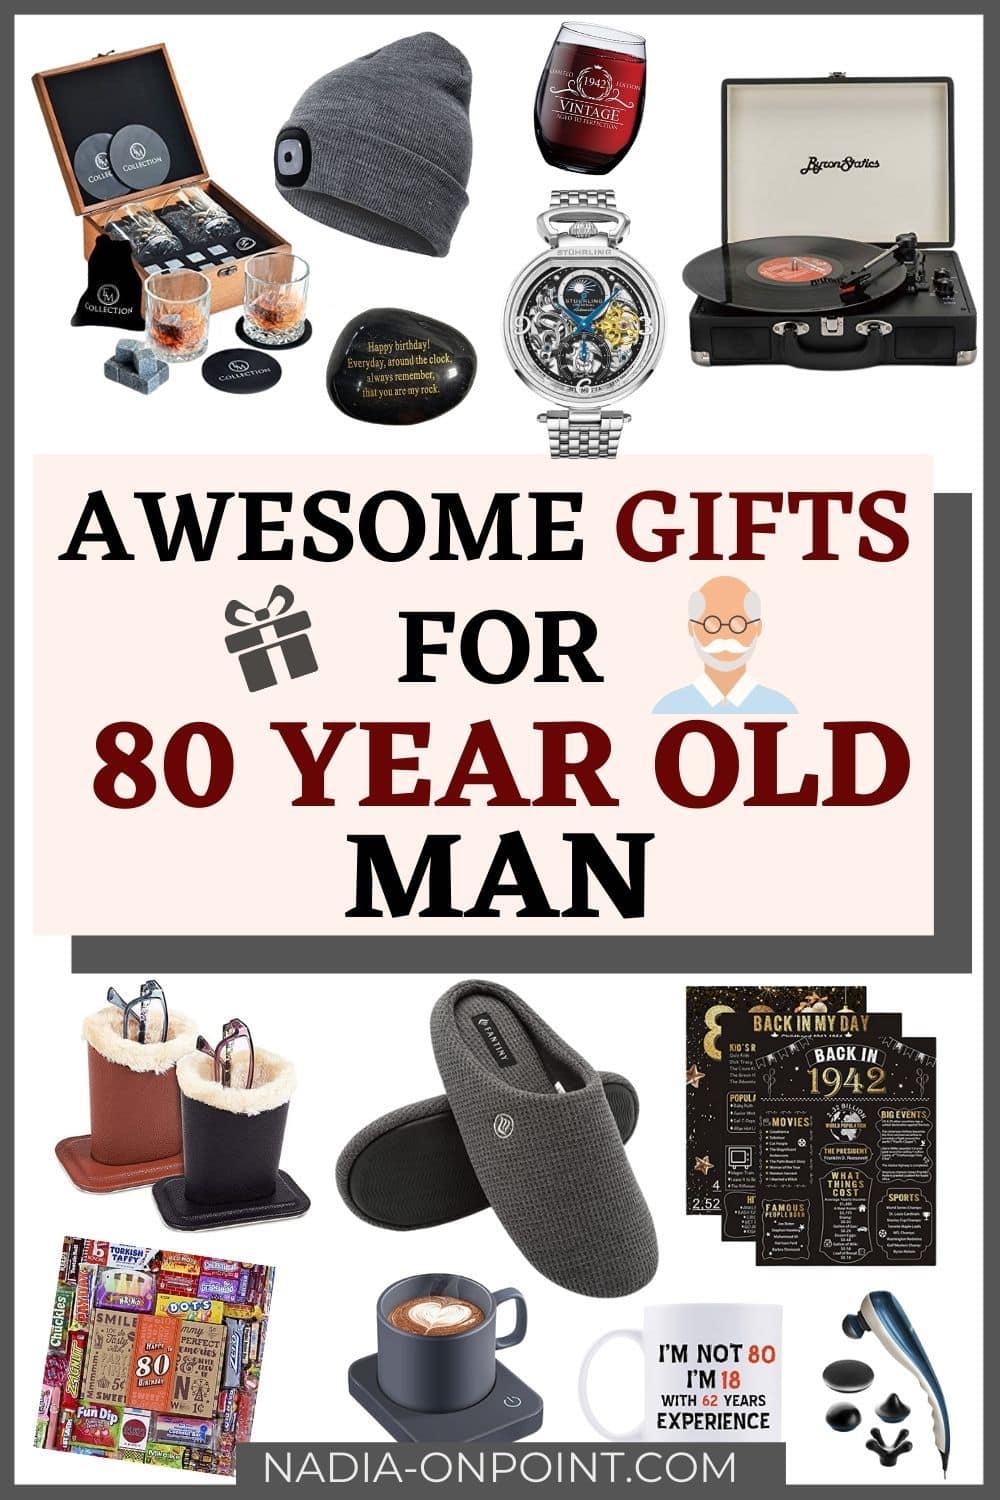 23-thoughtful-gifts-for-80-year-old-man-onpoint-gift-ideas